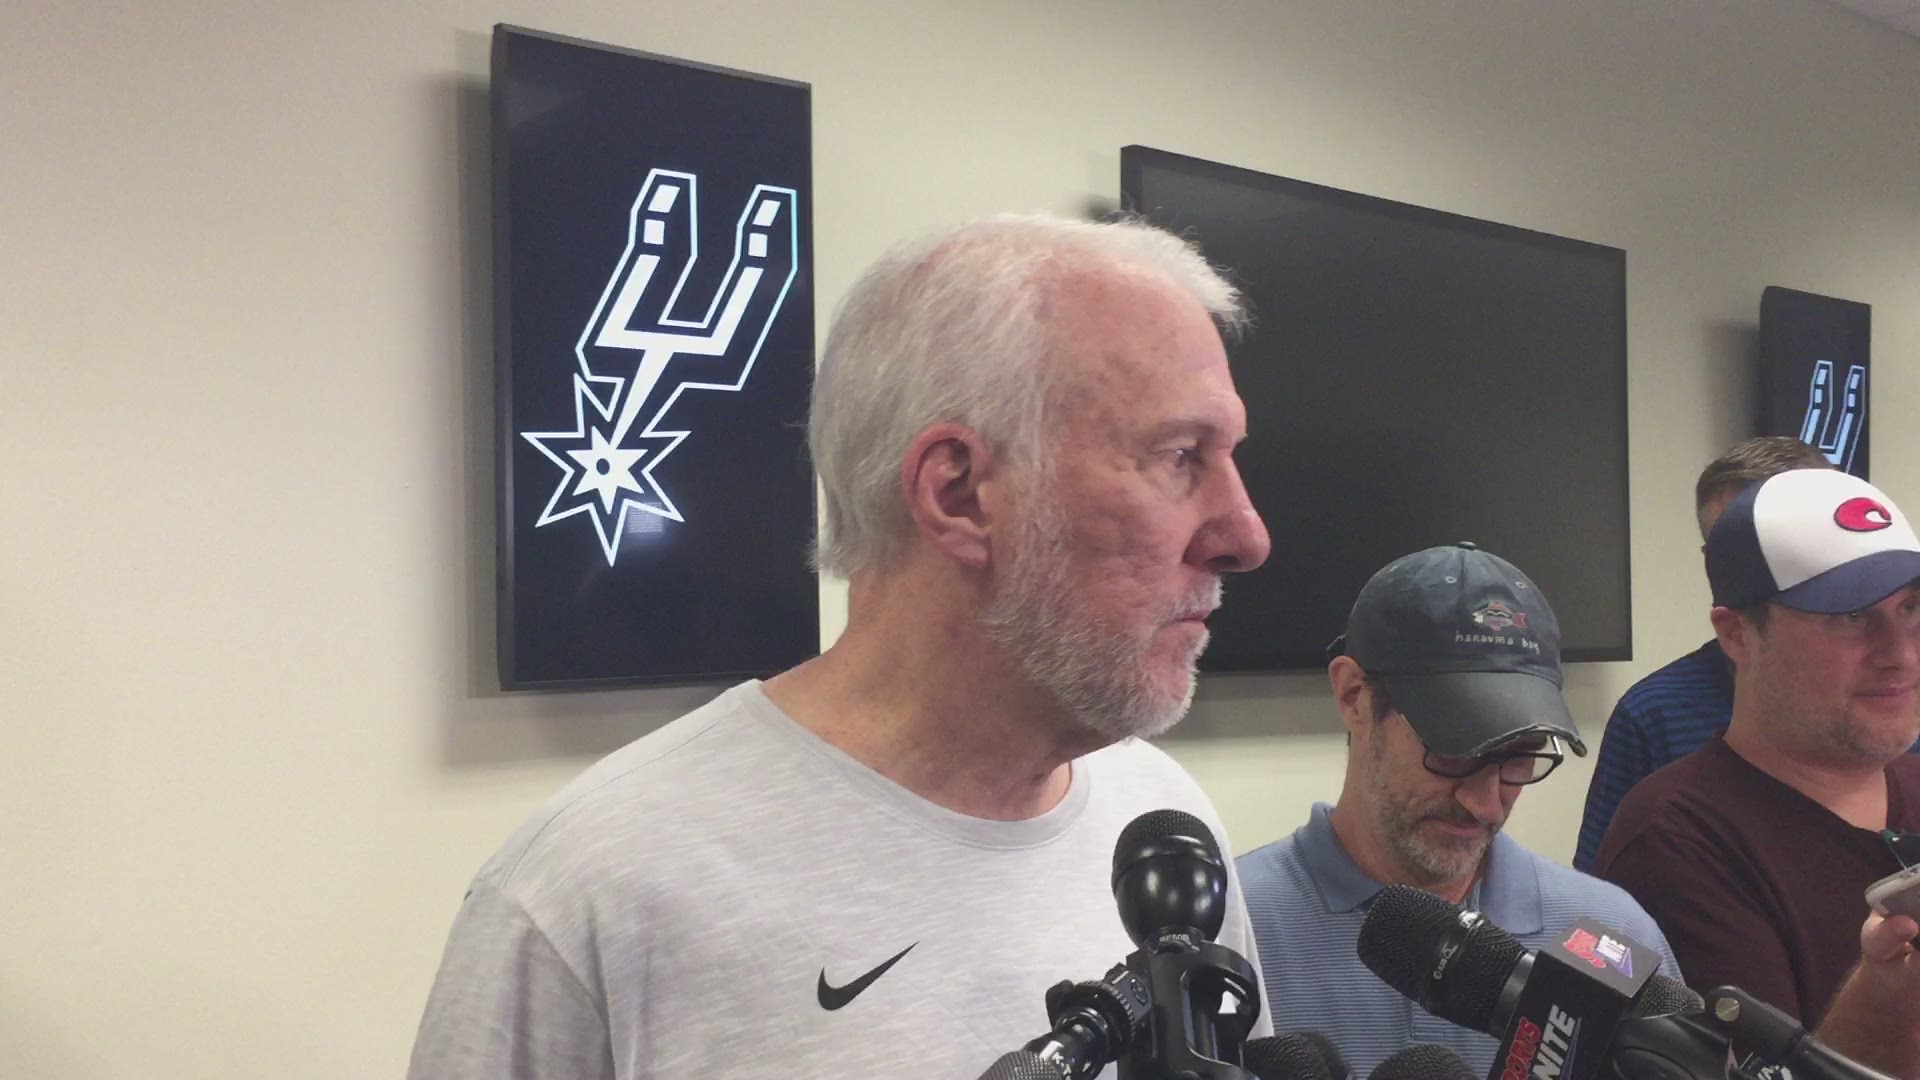 Spurs coach Gregg Popovich talks about the 2018-19 season, which ended Saturday with a Game 7 loss to the Denver Nuggets.